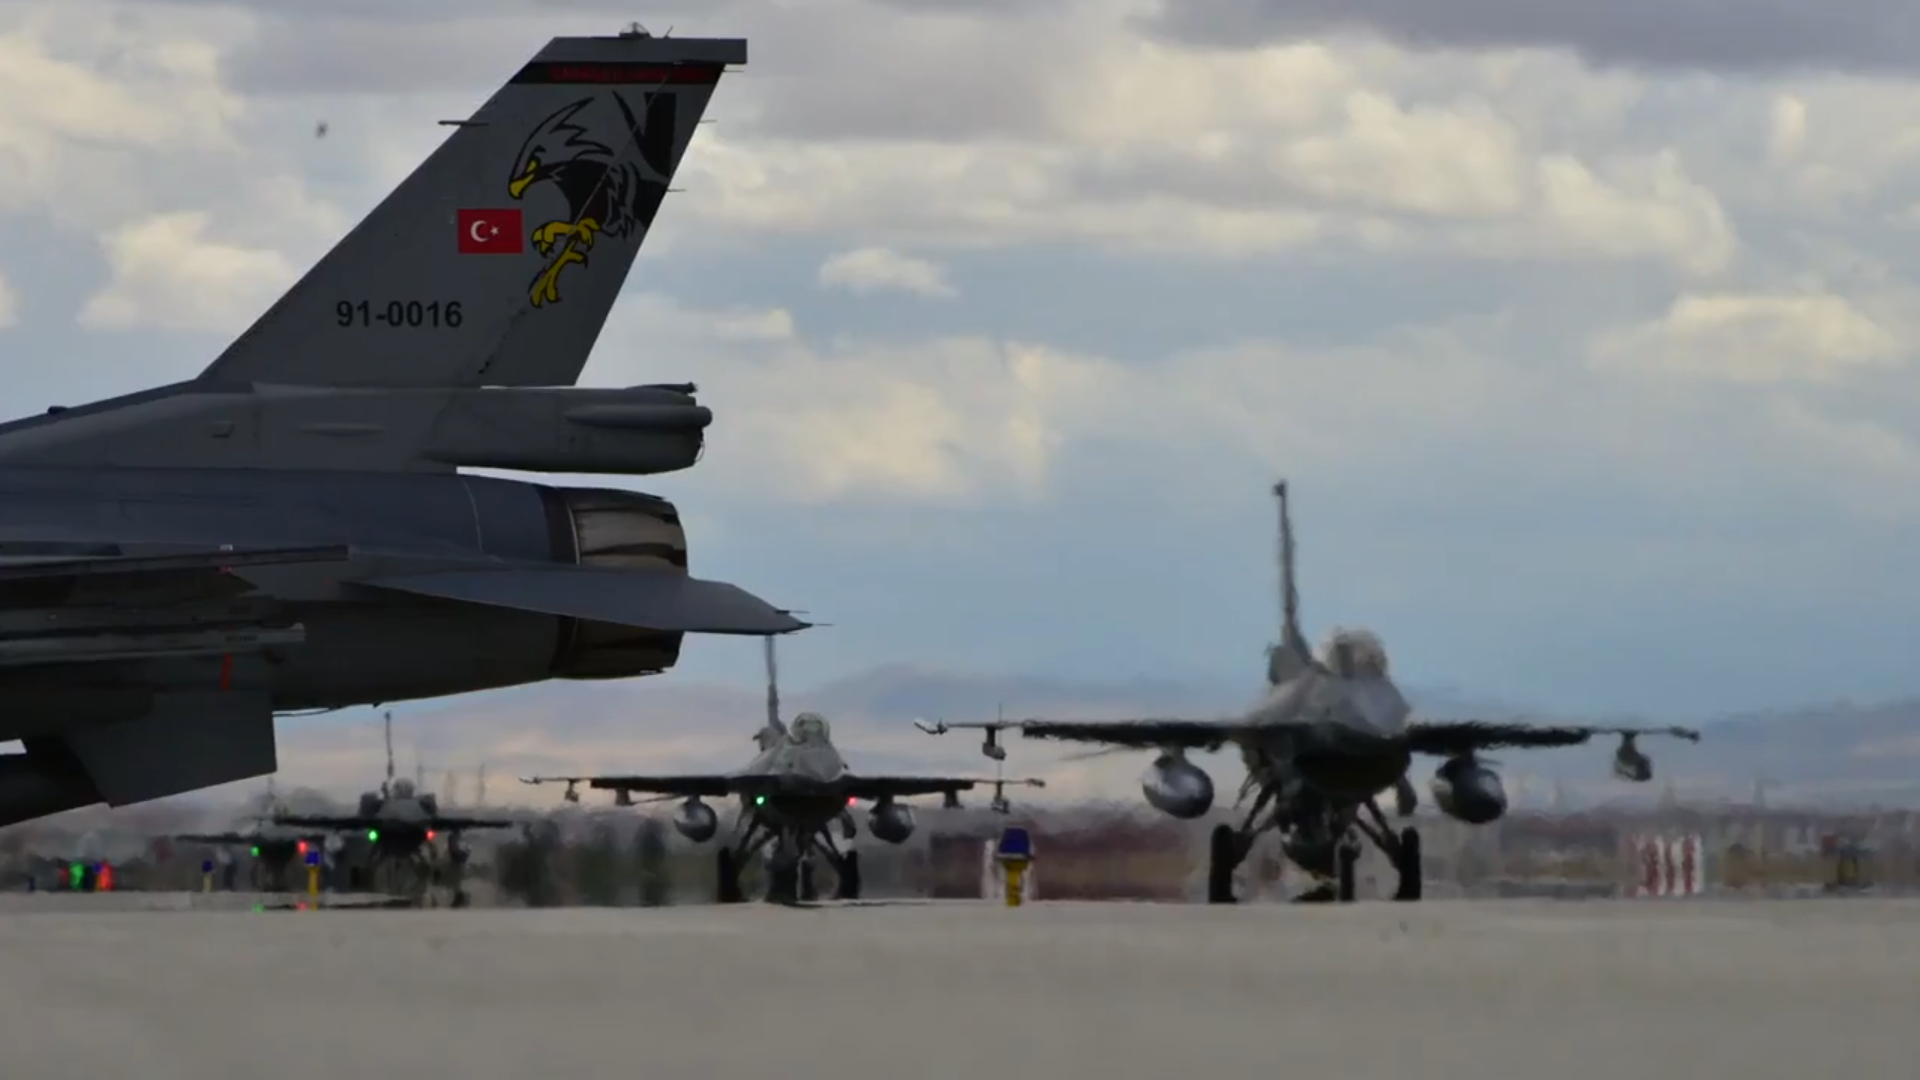 The International Anatolian Eagle-2021 Exercise Begins in June with The Participation of Allied Countries